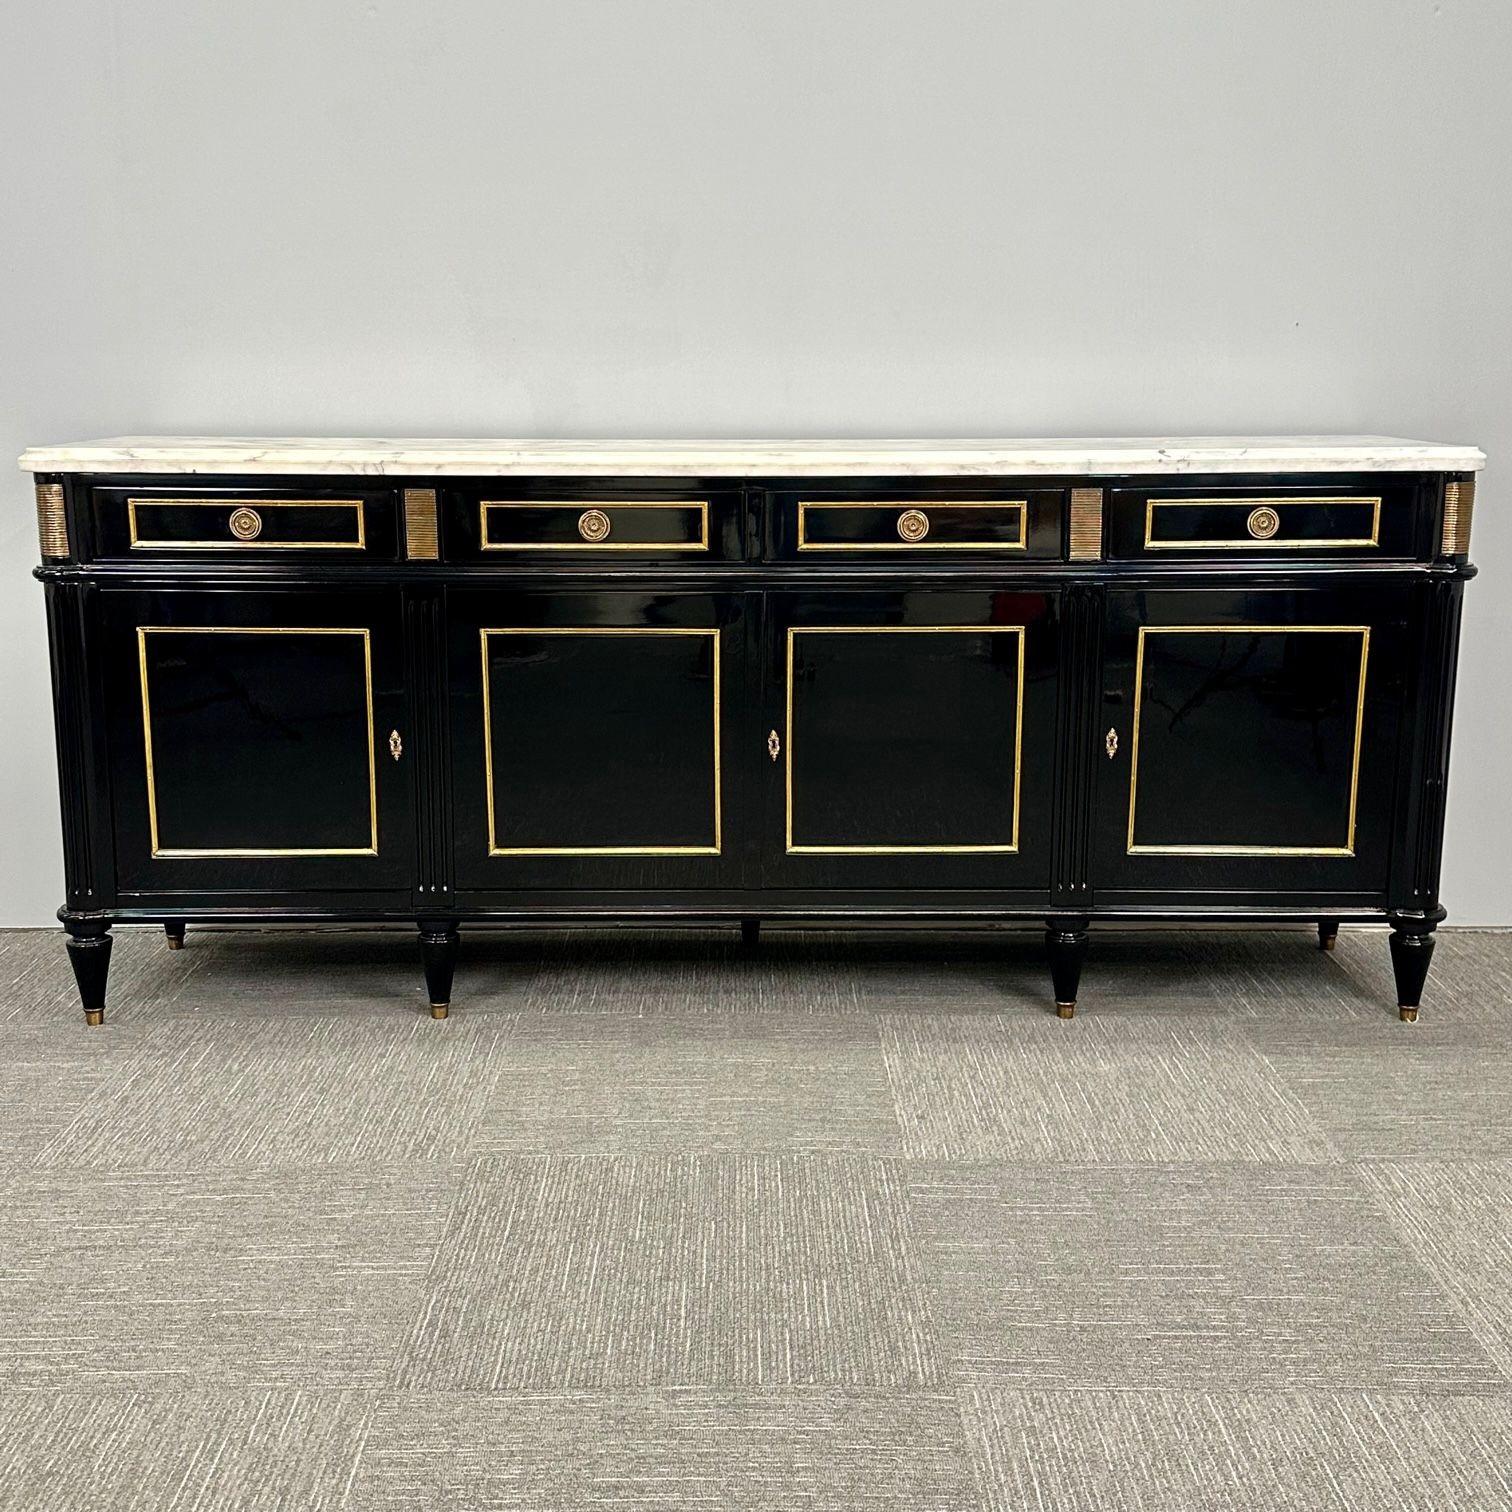 European Hollywood Regency Style Black Lacquer Sideboard, Credenza , Maison Jansen Style For Sale